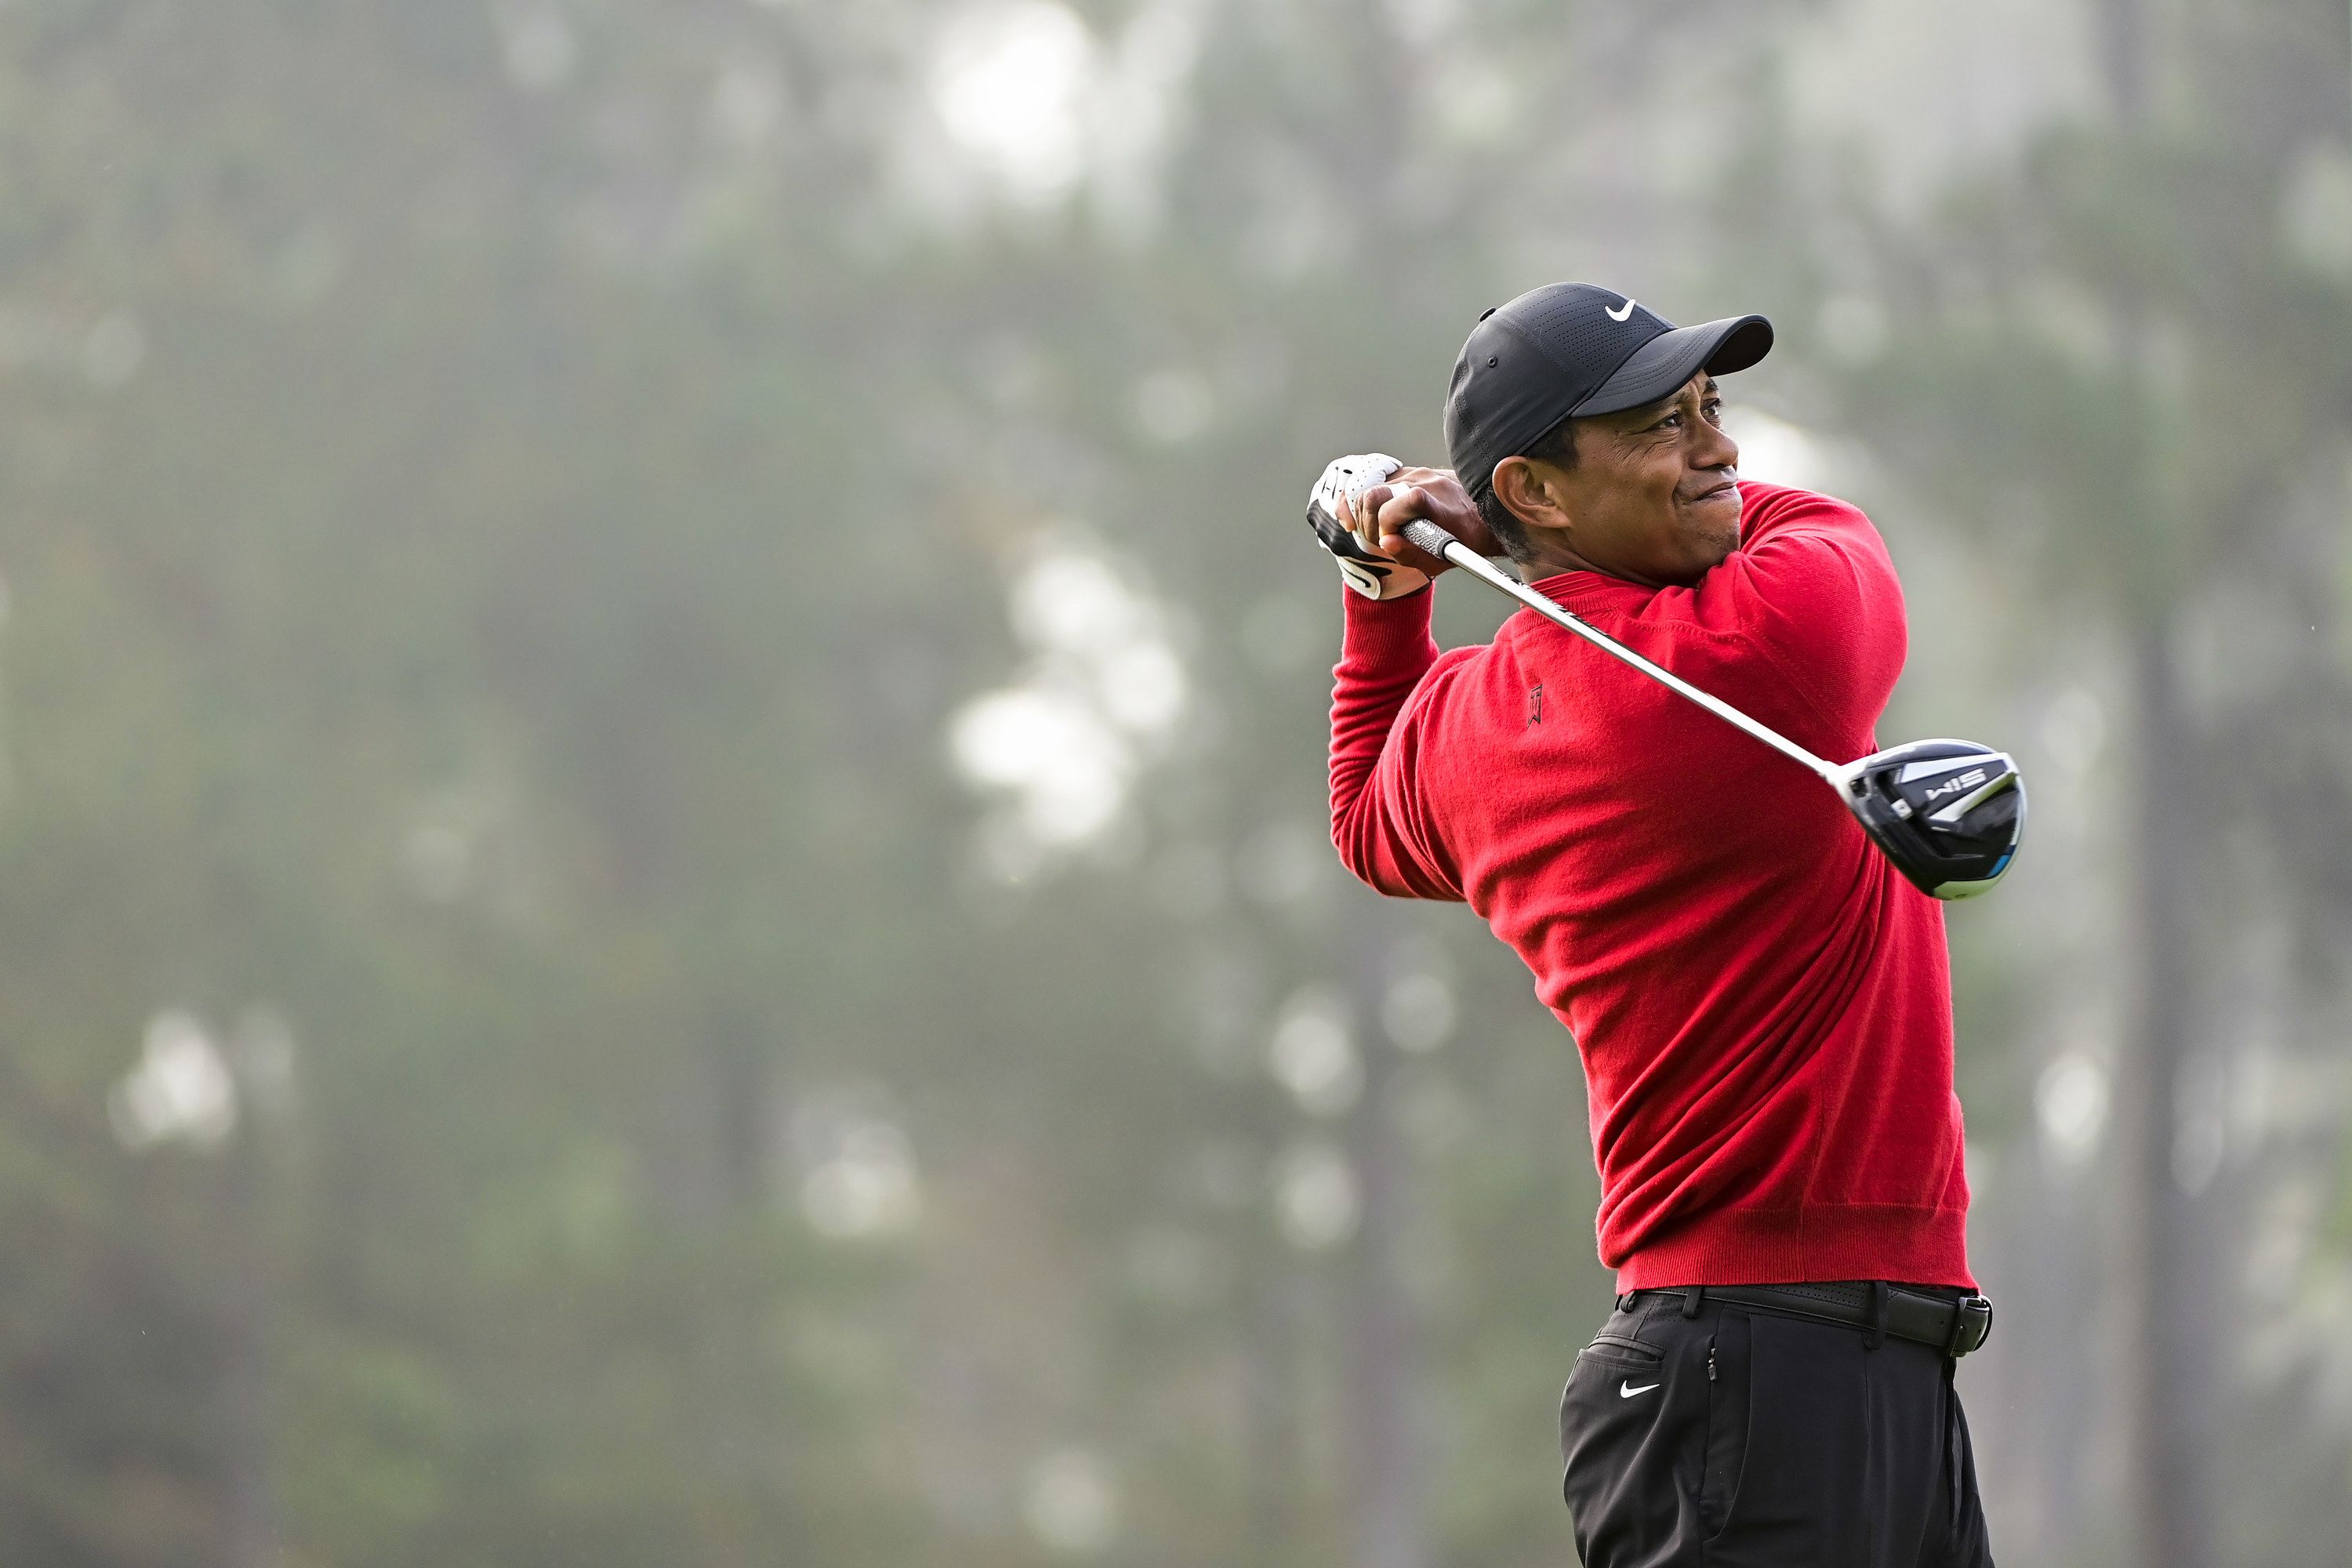 Masters champion Tiger Woods plays his stroke from the No. 1 tee during Round 4 of the Masters at Augusta National Golf Club, Sunday, November 15, 2020. (Photo by Augusta National via Getty Images)